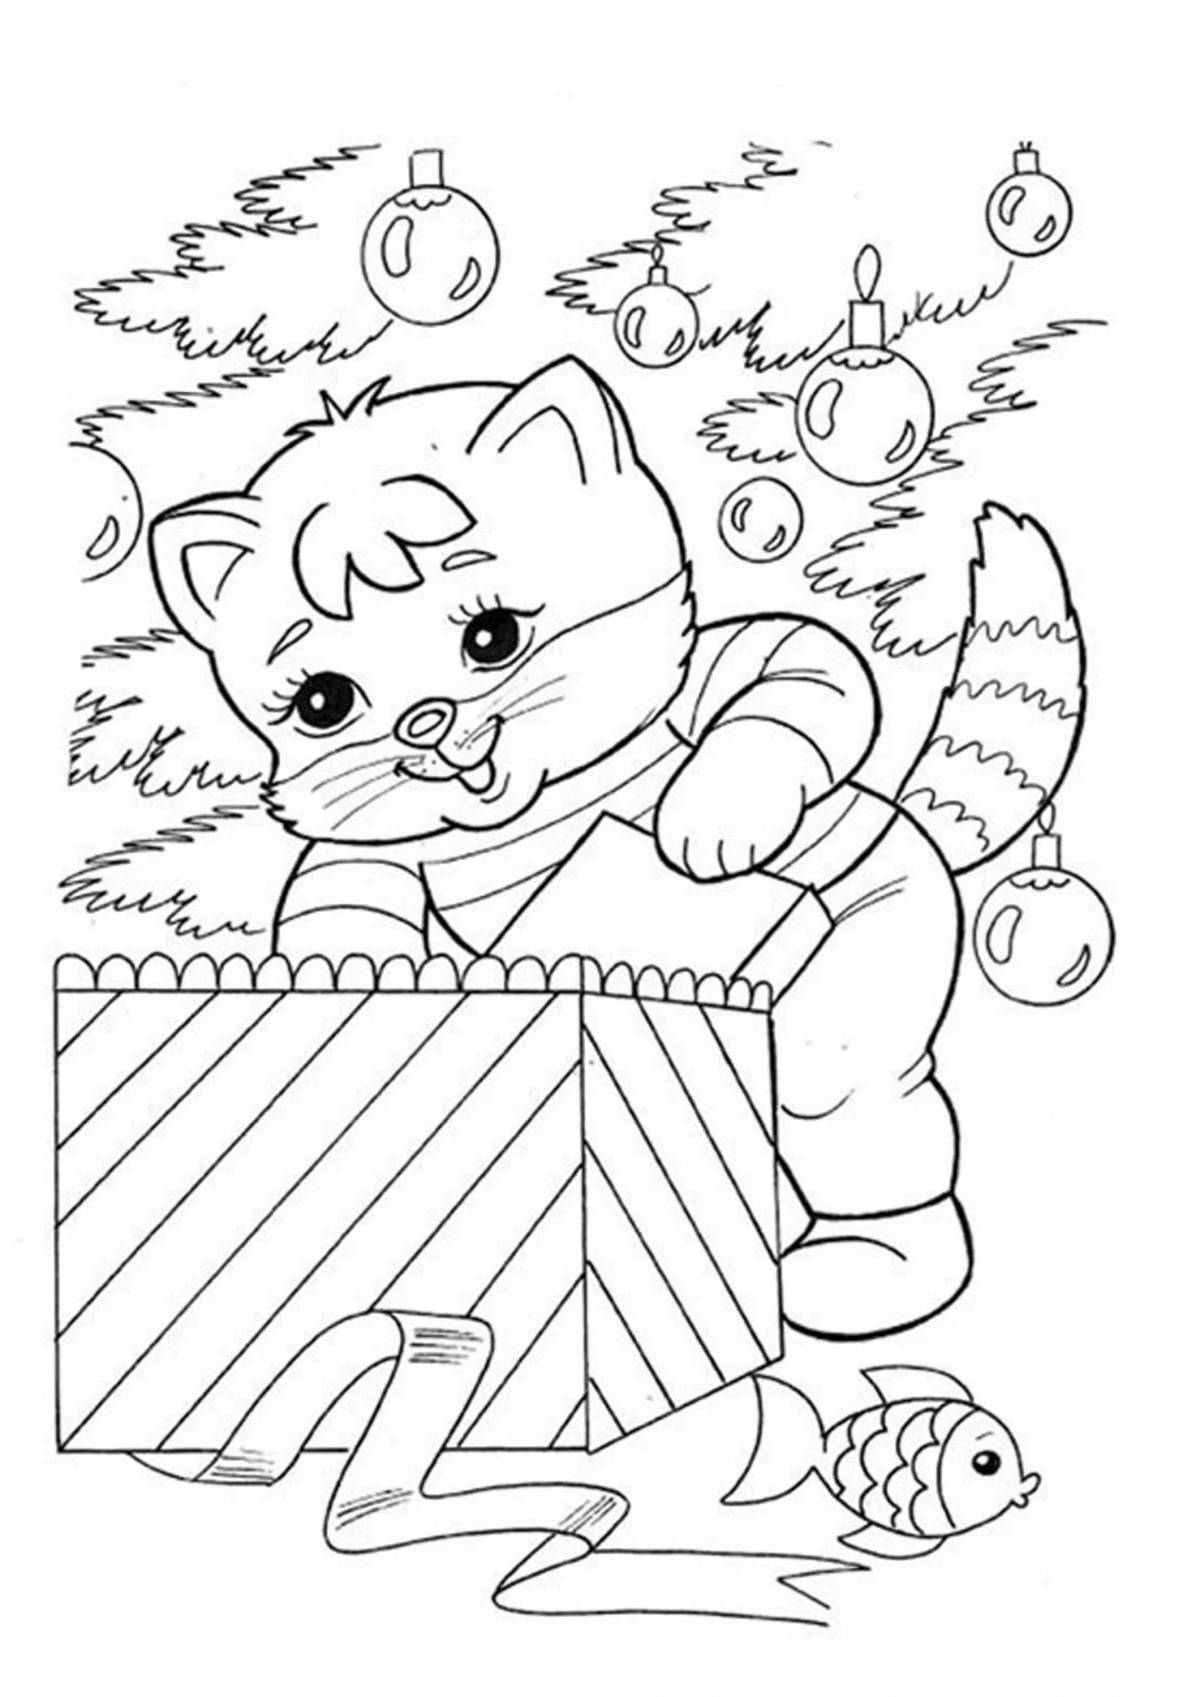 Colorful Christmas cat coloring book